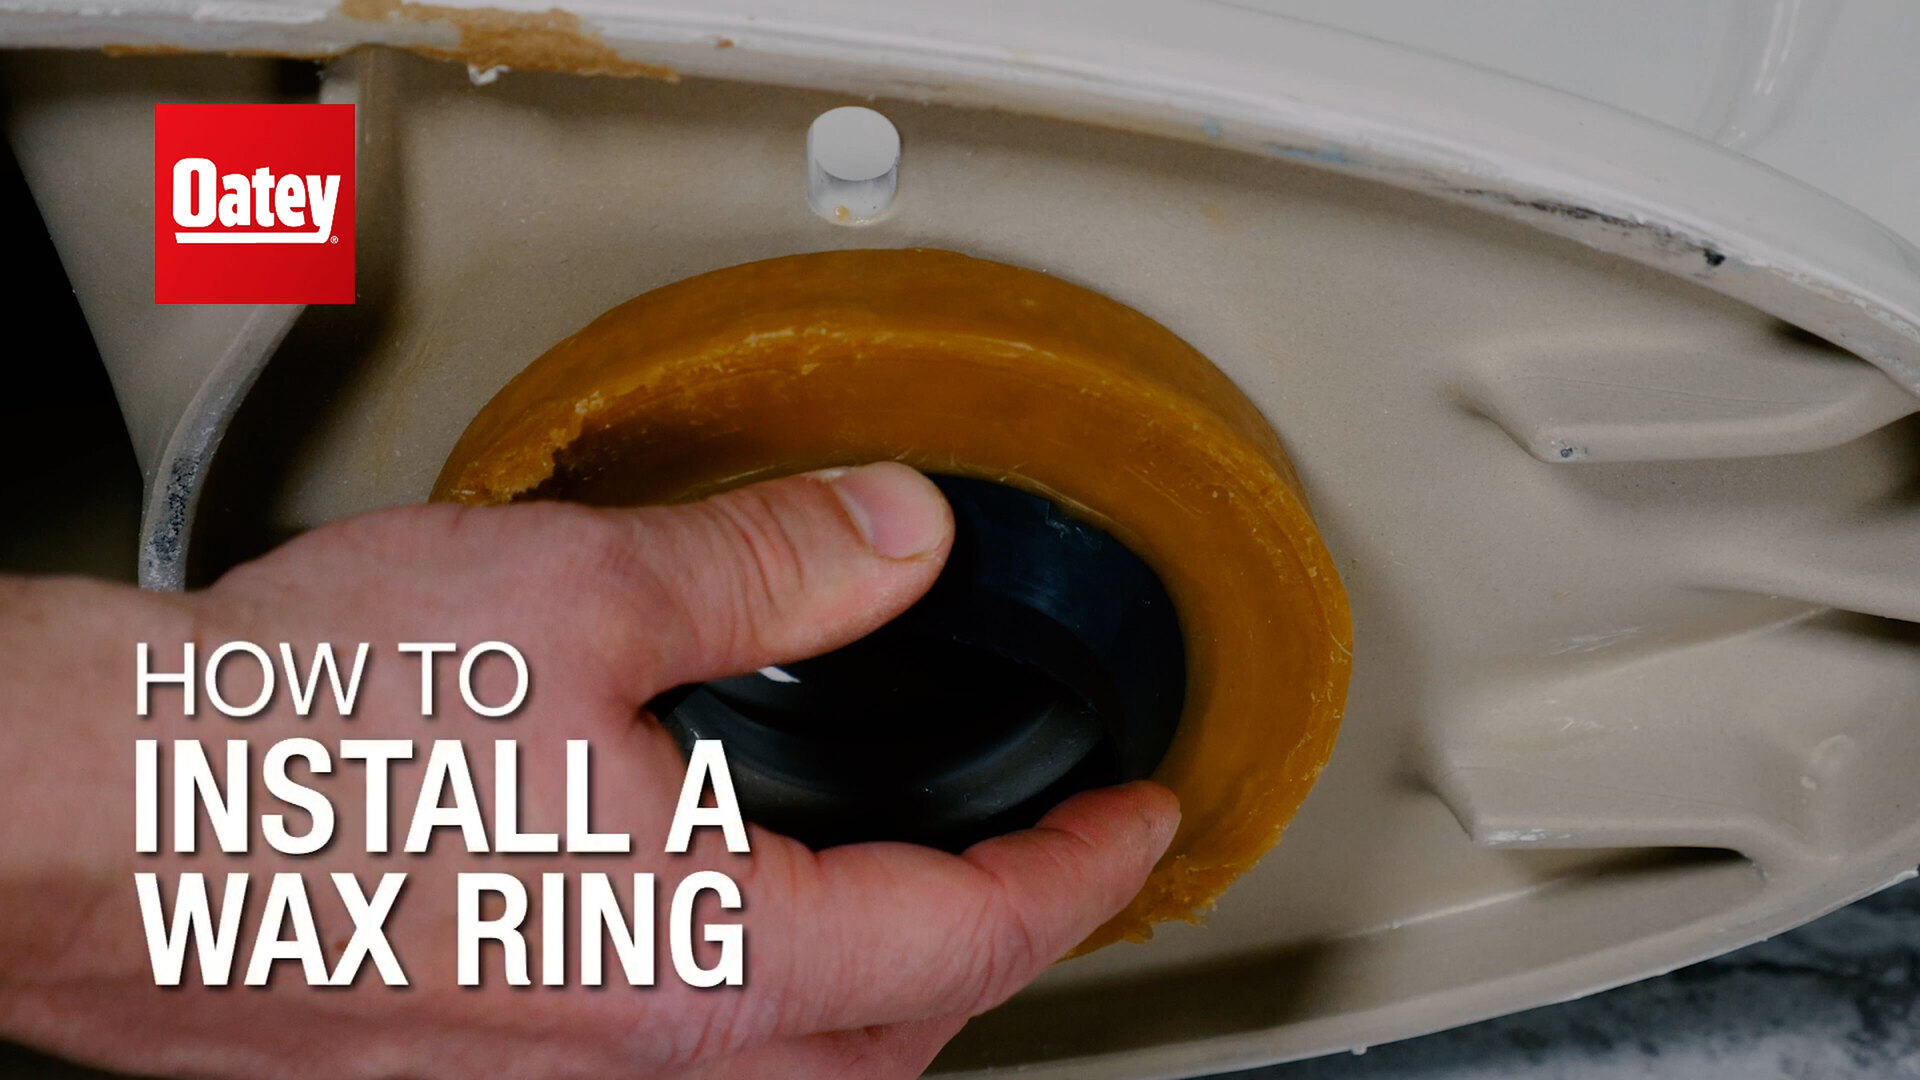 How to Install A Toilet Wax Ring 